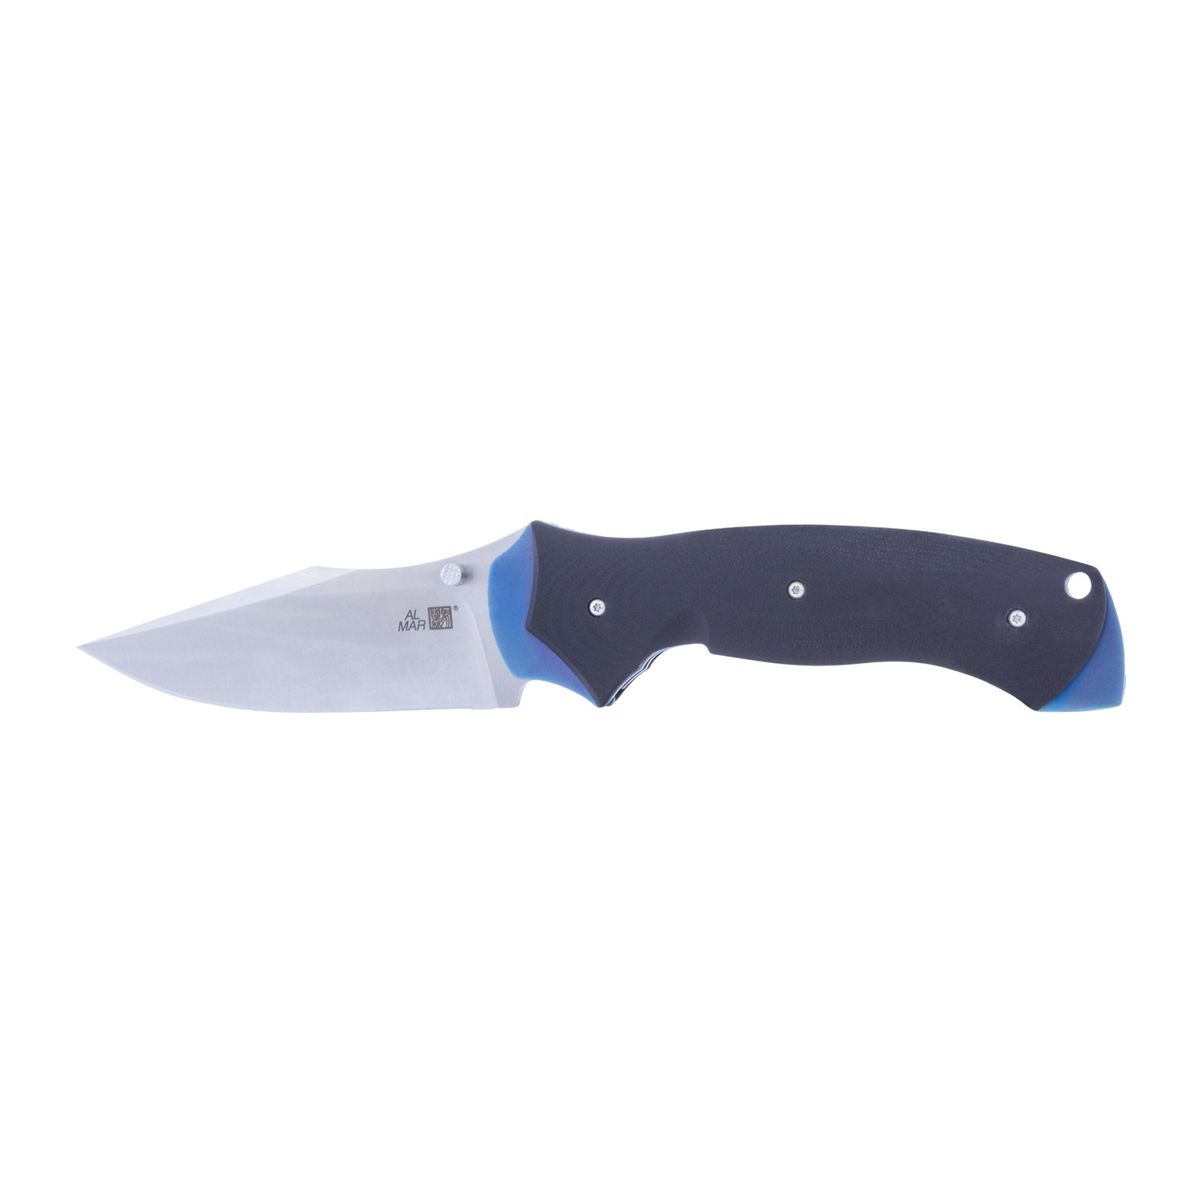 Picture of Sunex SUNAMK4133 3.75 in. B21 Rexroat Folding Knife with Sheath for D2 & G10